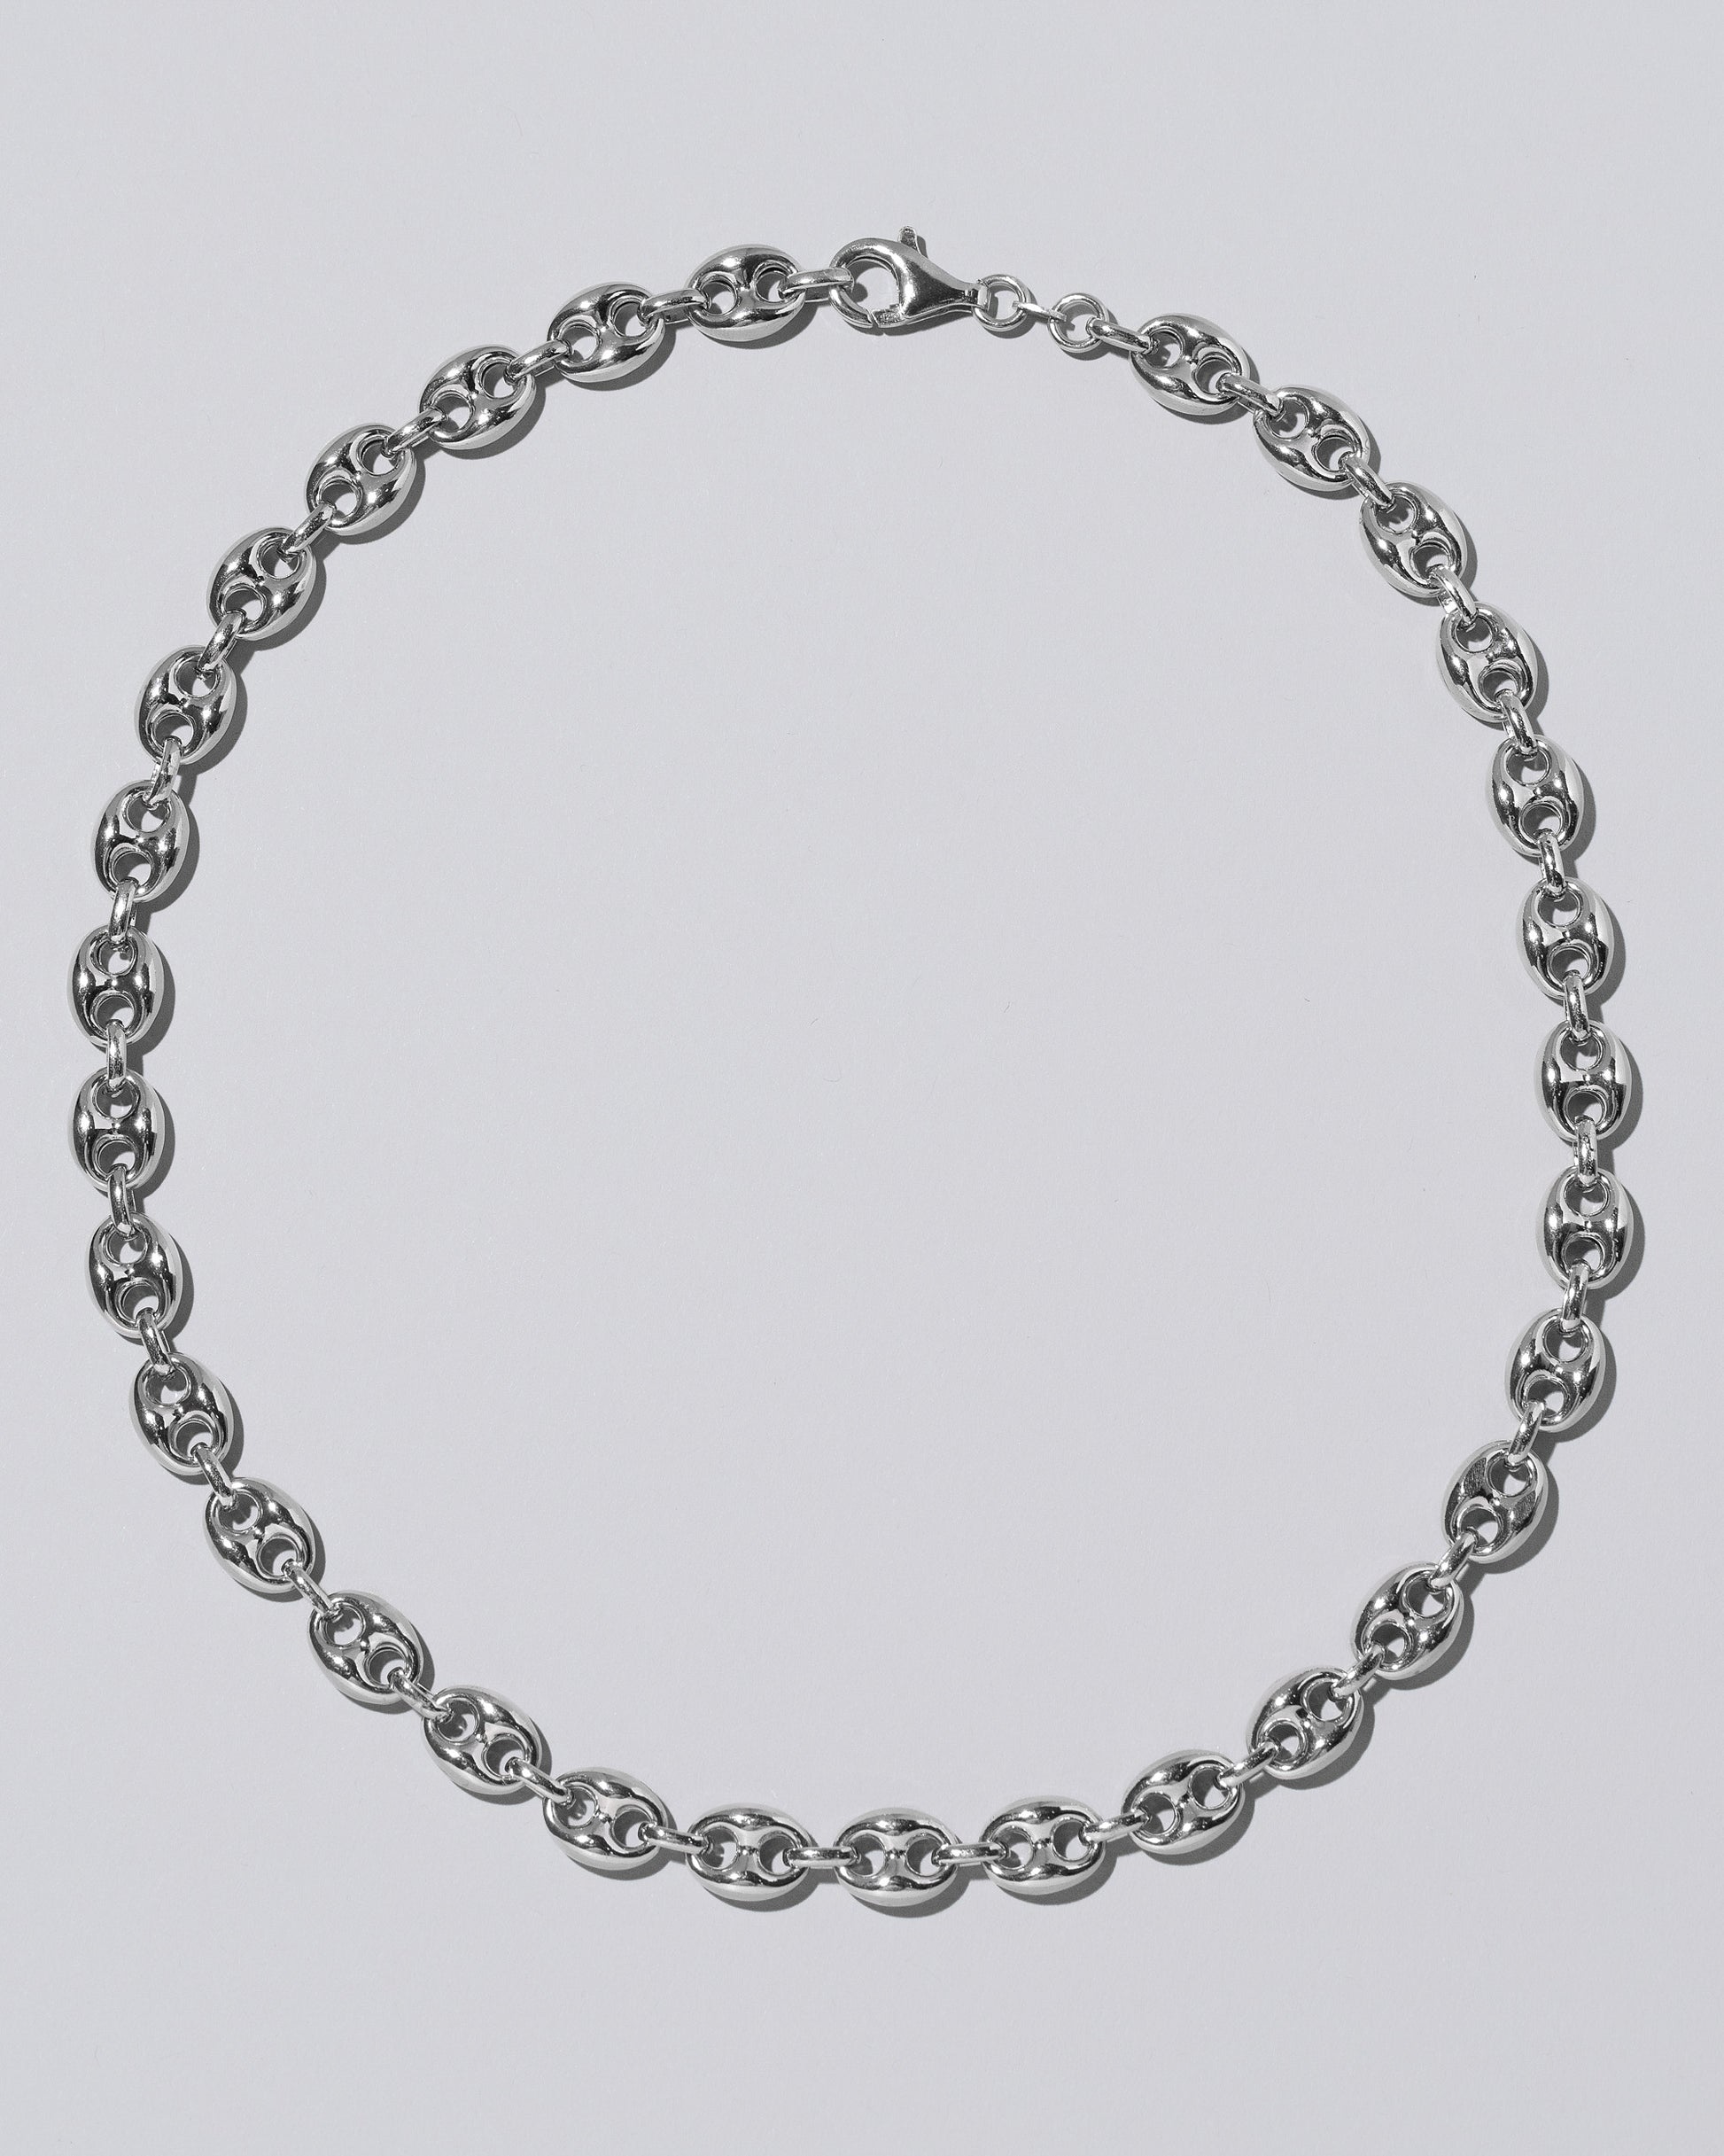 9.2mm Silver Puffed Mariner Chain on light color background.